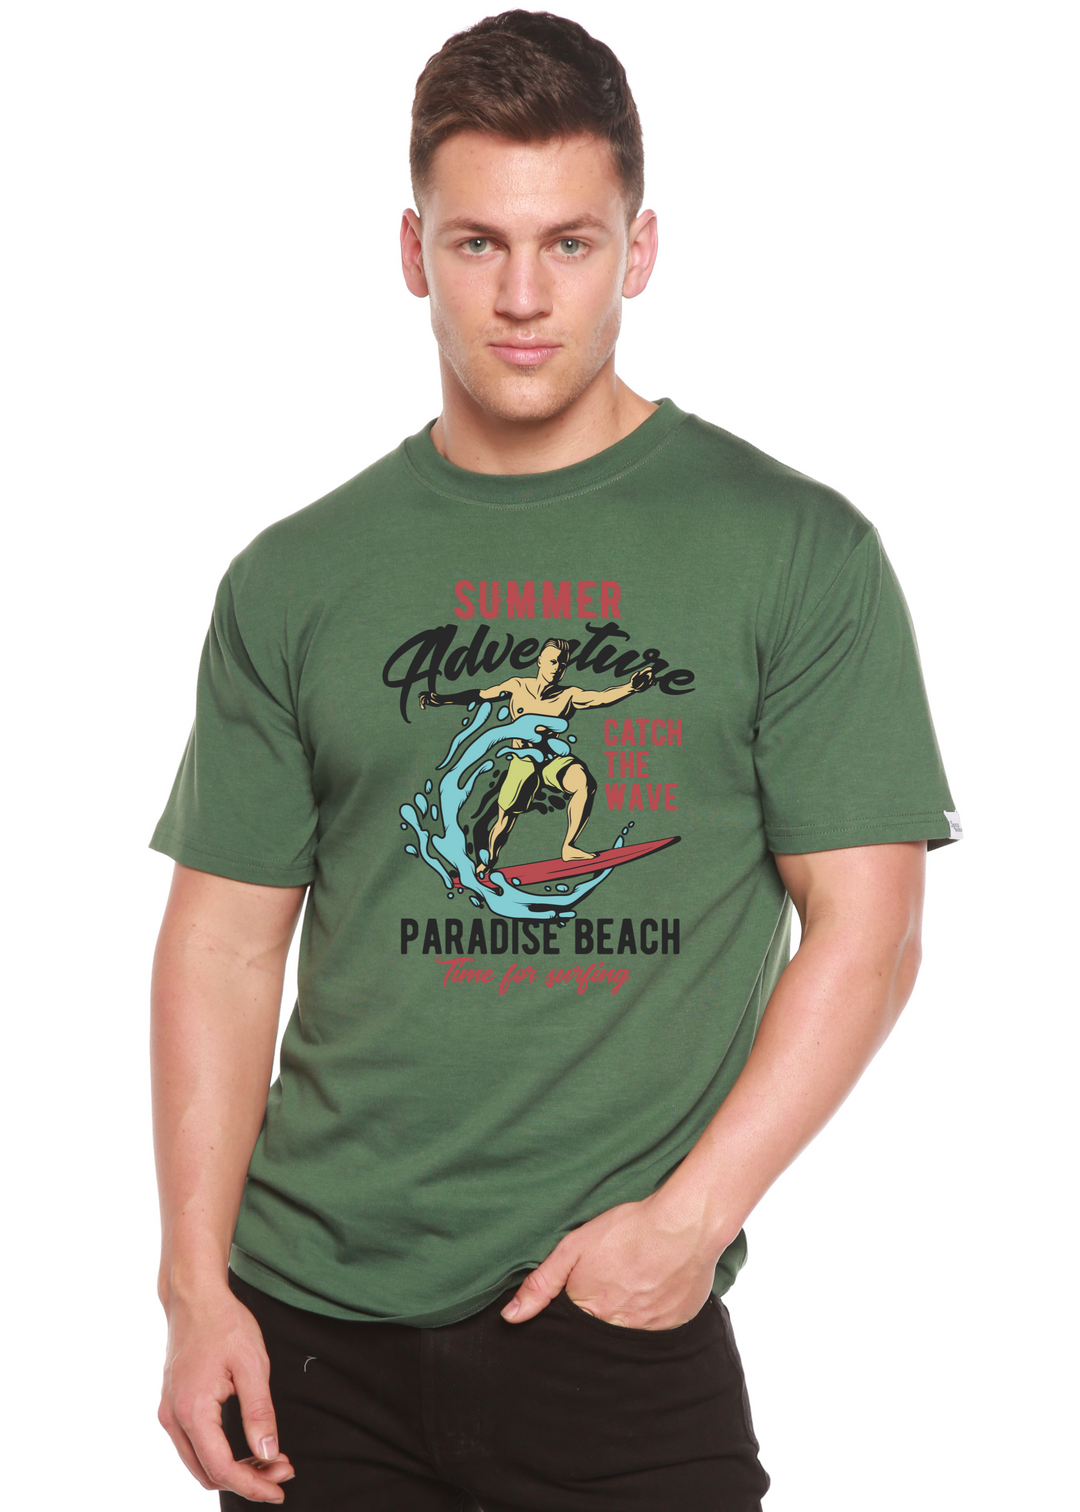 Catch The Wave men's bamboo tshirt pine green